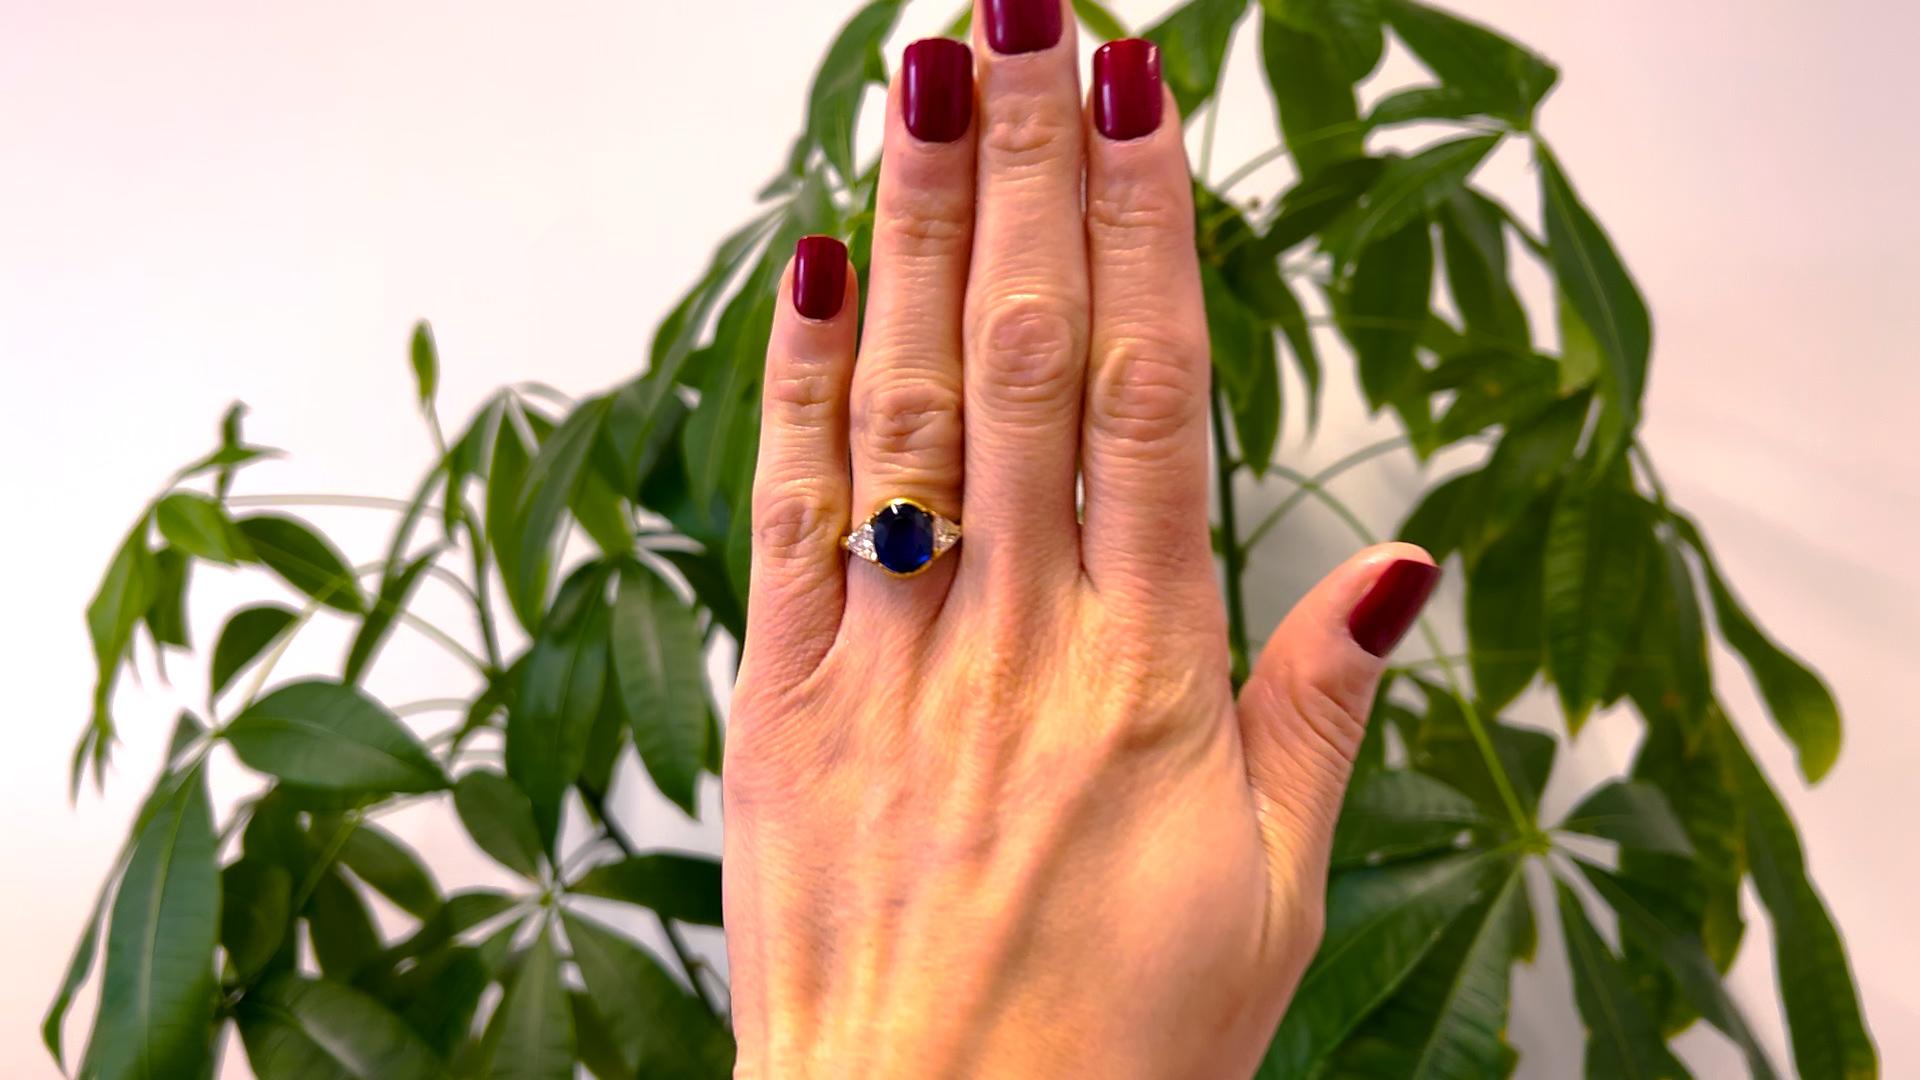 One Vintage GIA Thai 4.46 Carat Sapphire and Diamond 18k Yellow Gold Three Stone Ring. Featuring one oval mixed cut sapphire weighing 4.46 carats, accompanied with GIA #2235134968 stating the sapphire is of Thai origin. Accented by two trillion cut